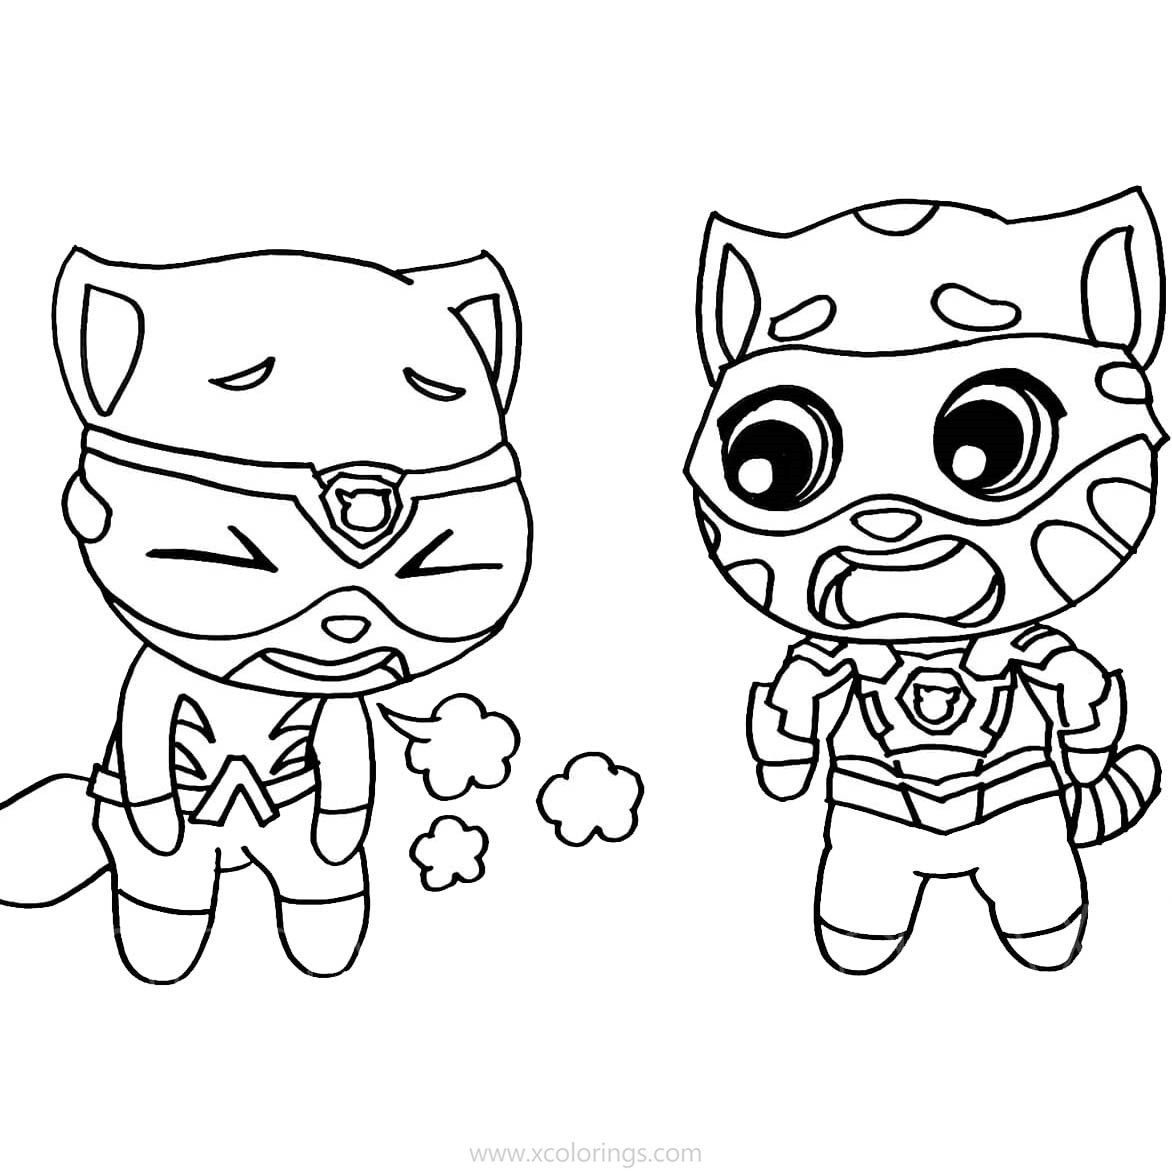 Talking Tom Heroes Coloring Pages ...